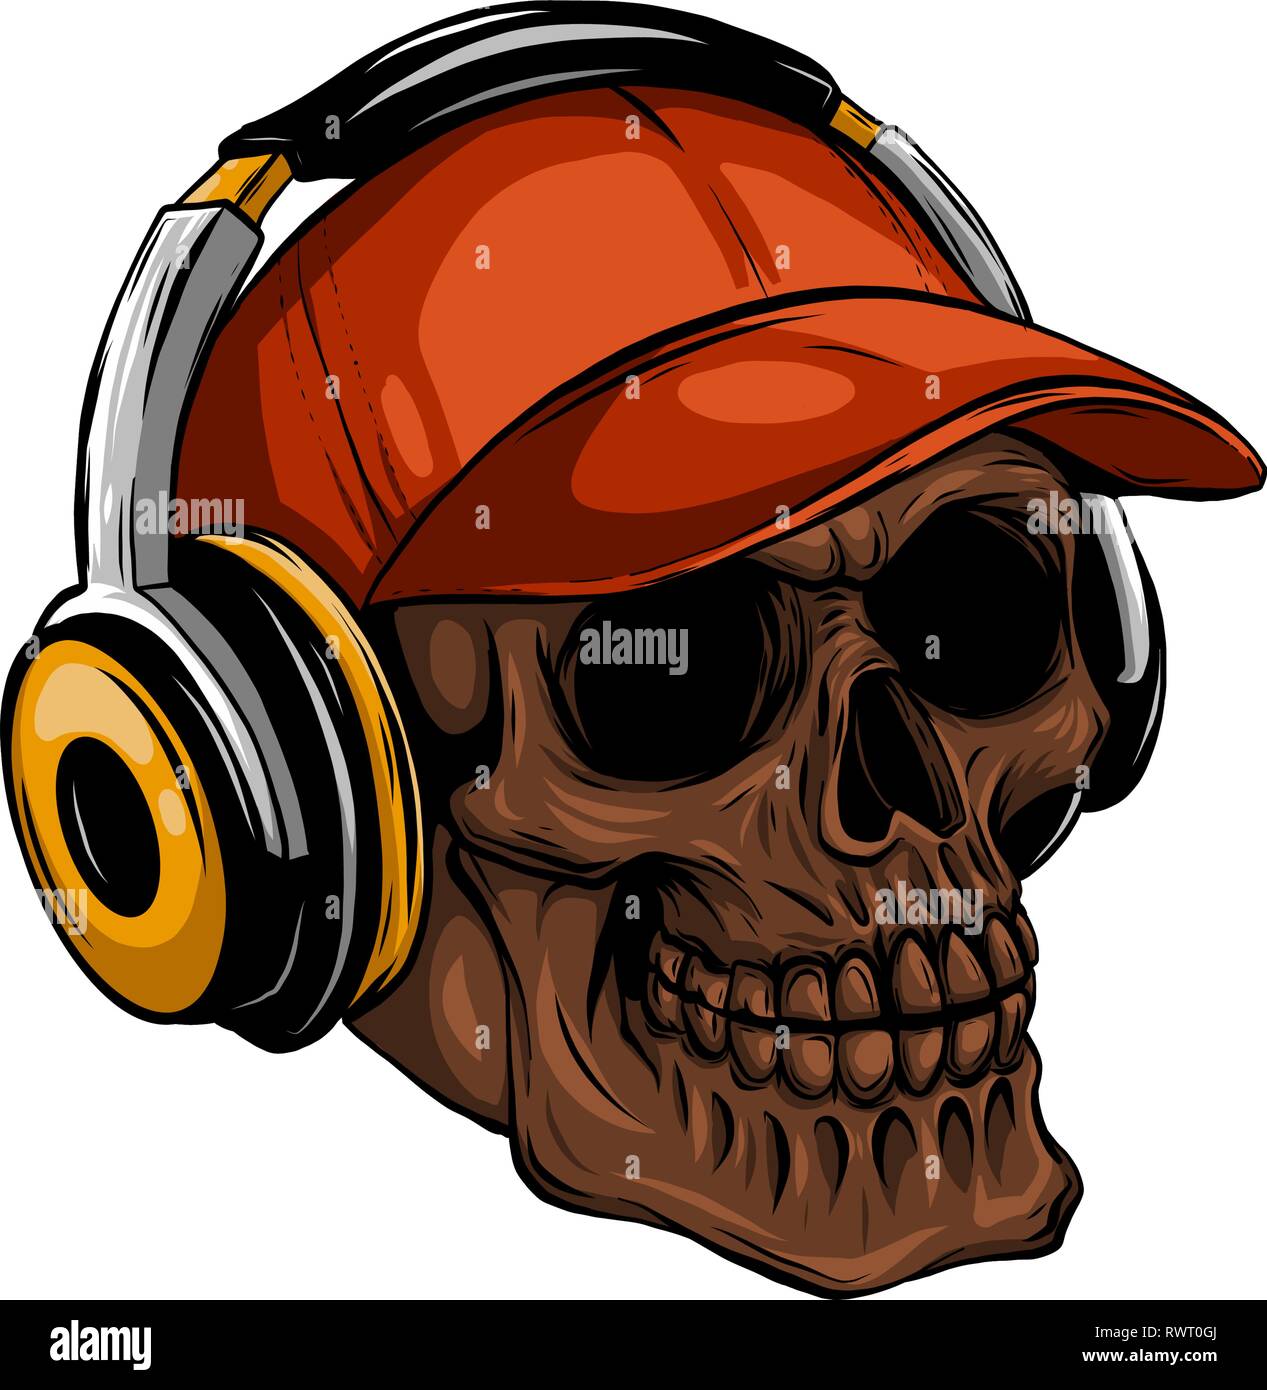 Skull Headphones High Resolution Stock Photography and Images - Alamy